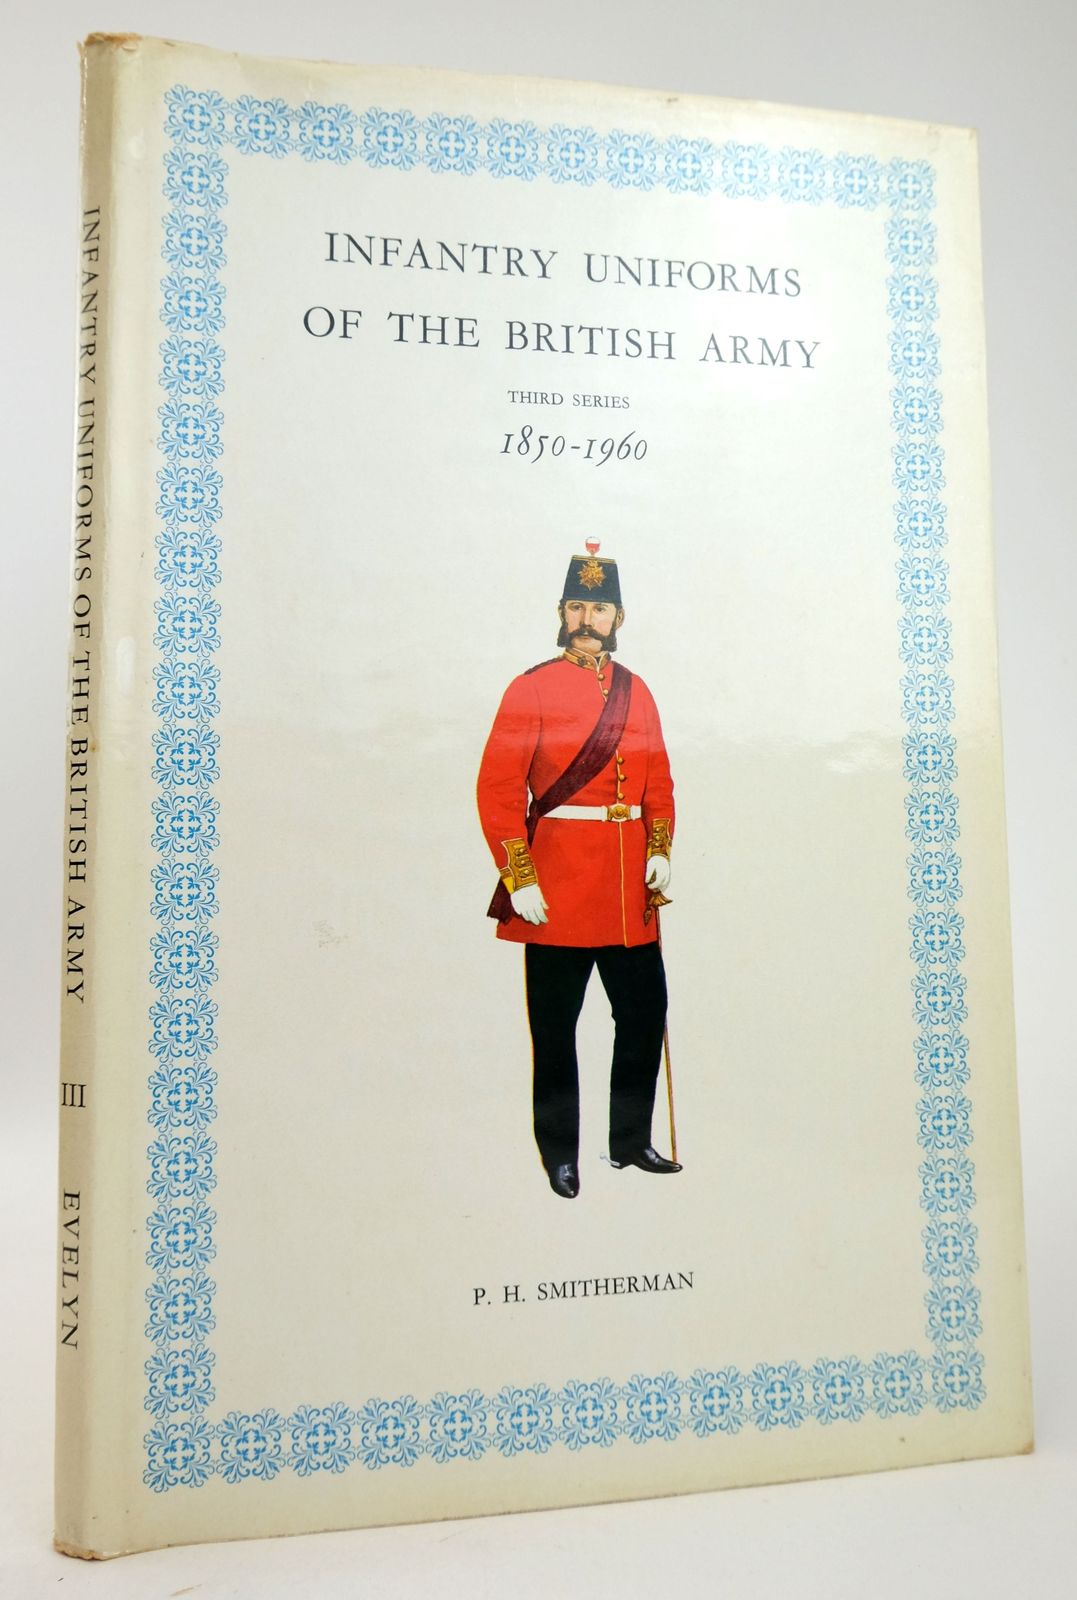 Photo of INFANTRY UNIFORMS OF THE BRITISH ARMY 1850-1960- Stock Number: 1819976